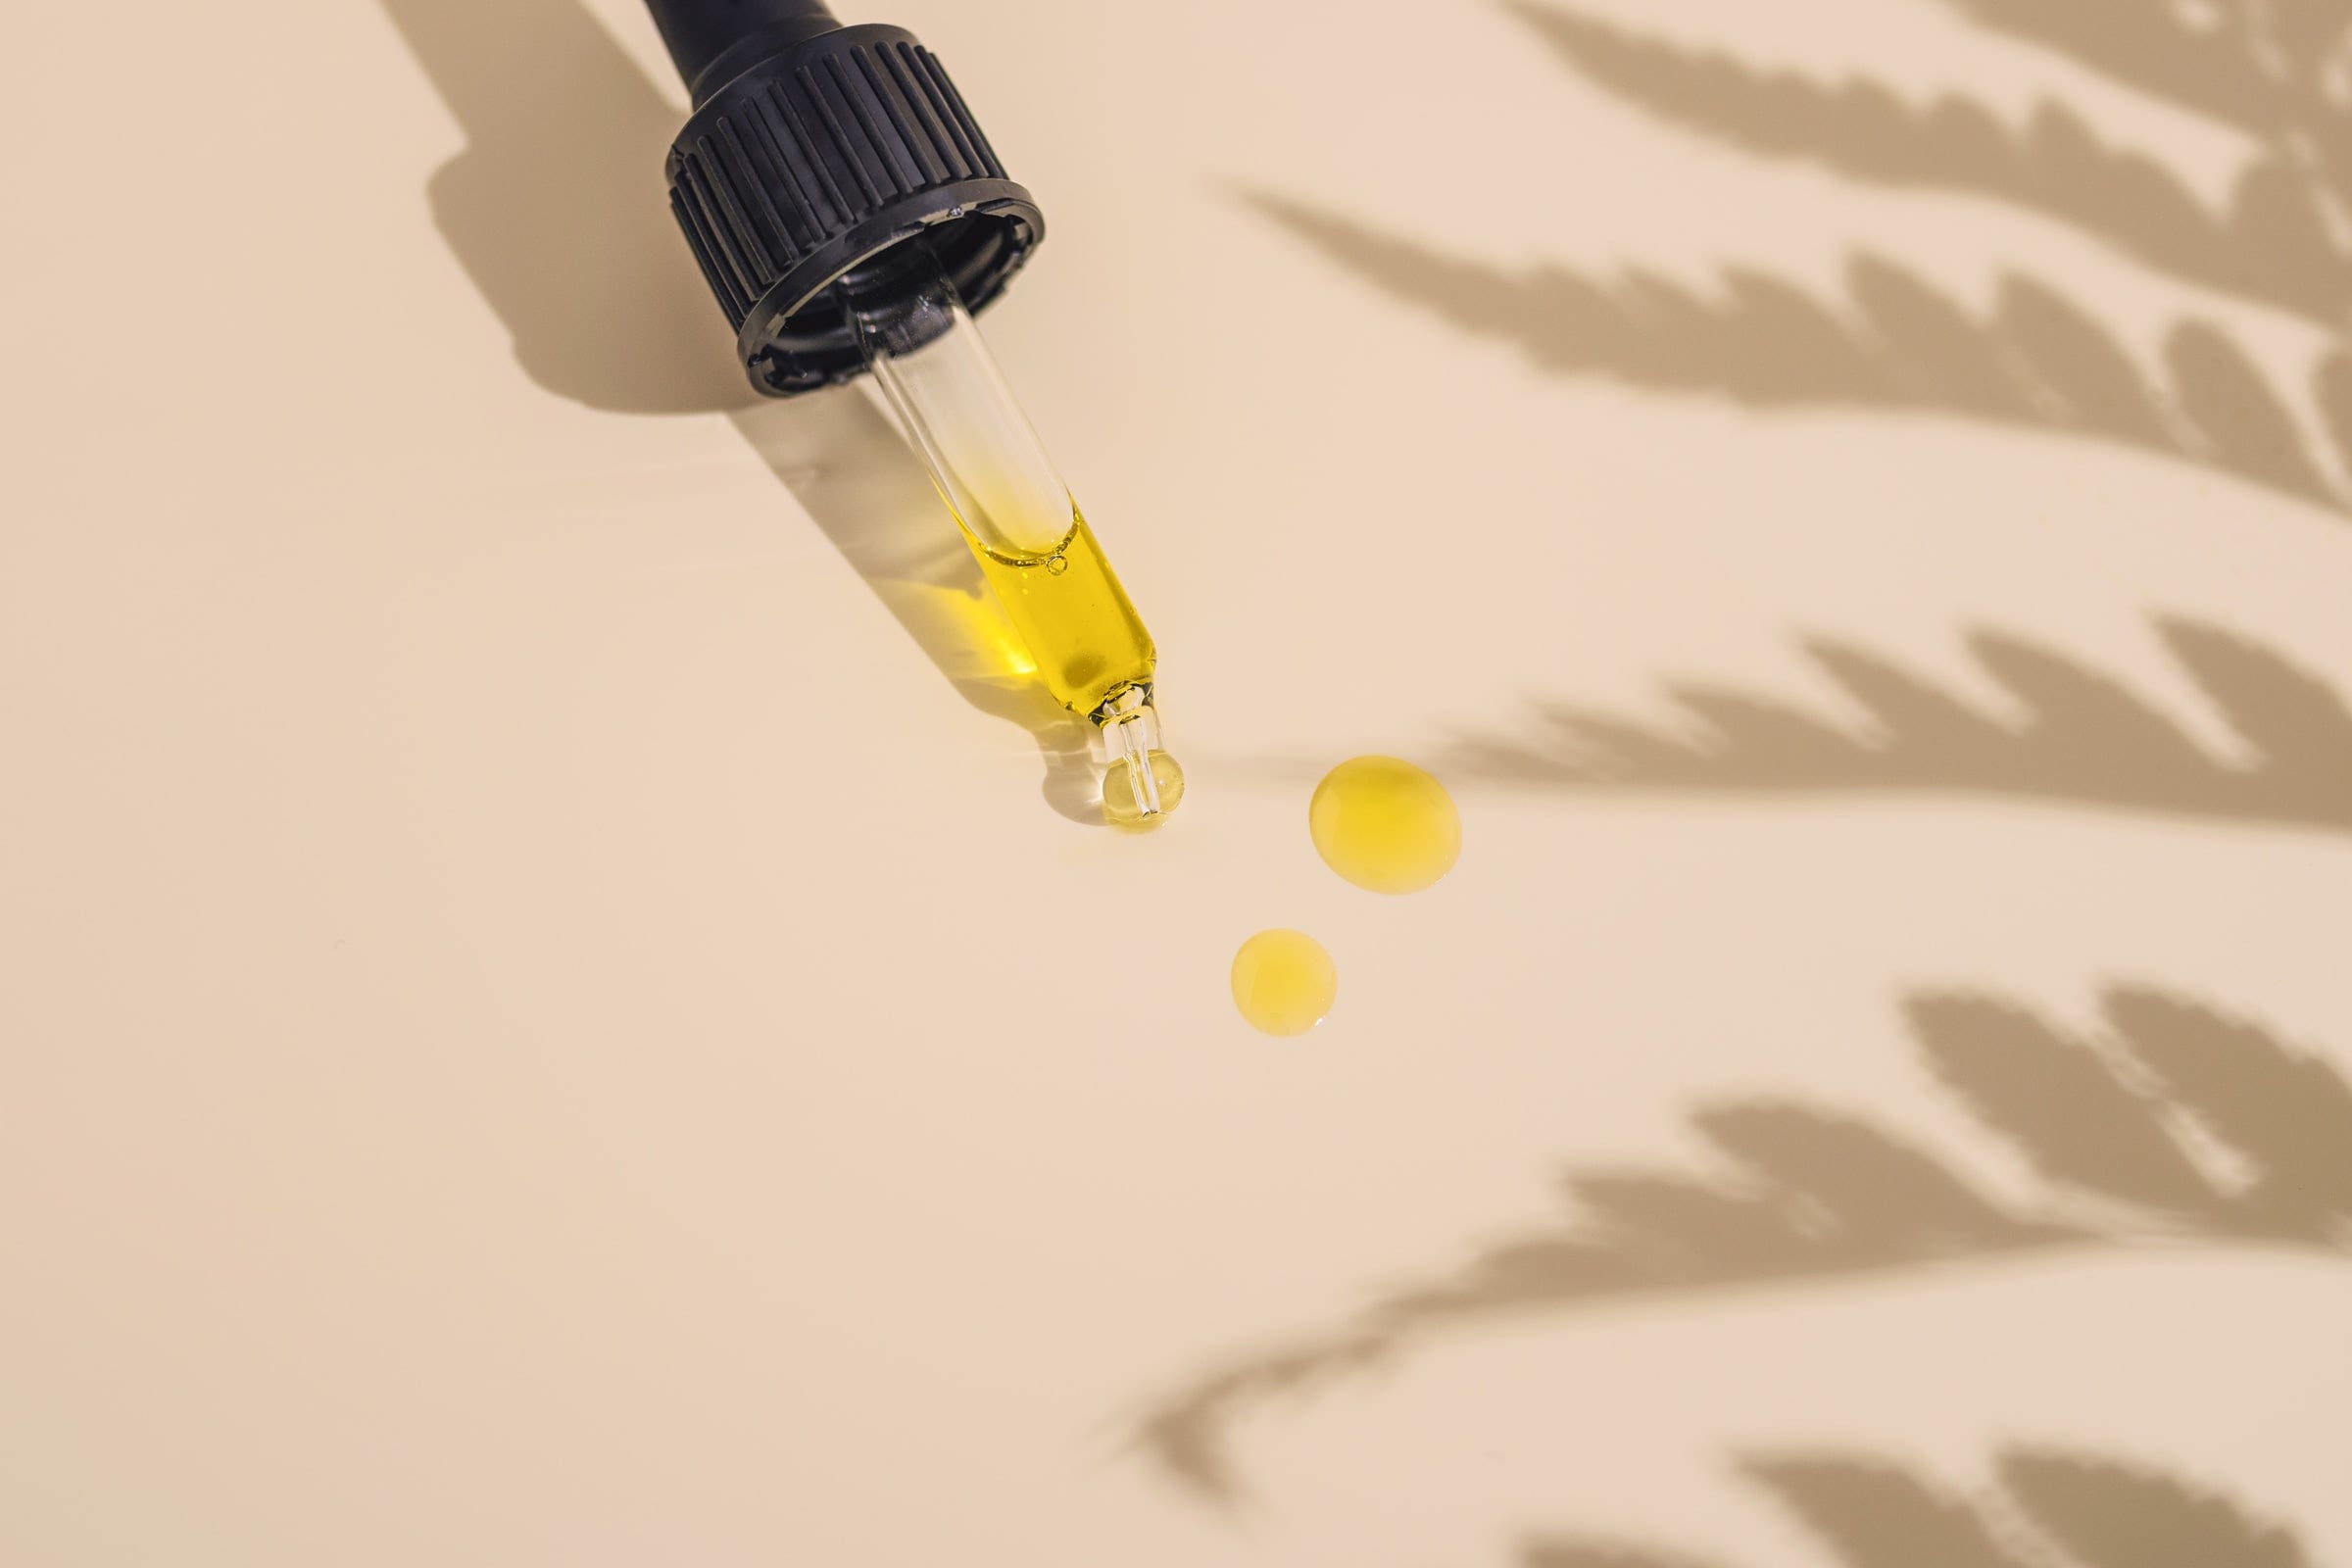 Flora Growth Stock Skyrockets On CBD Skincare Brand Distribution Via Walmart.com And Coppel In Mexico